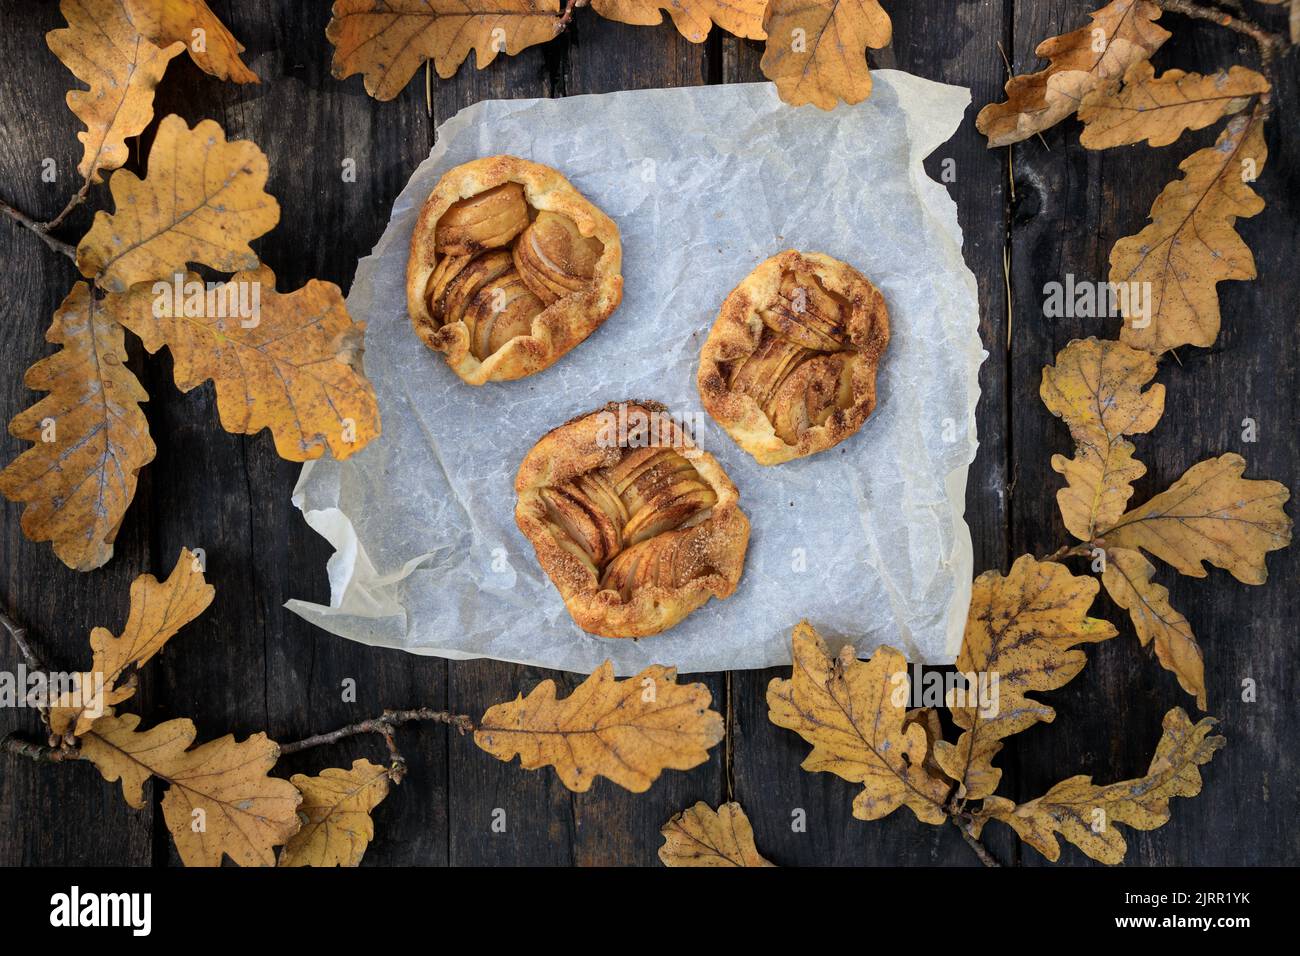 rustic traditional french biscuit cake with apples in autumn style, top view. Stock Photo